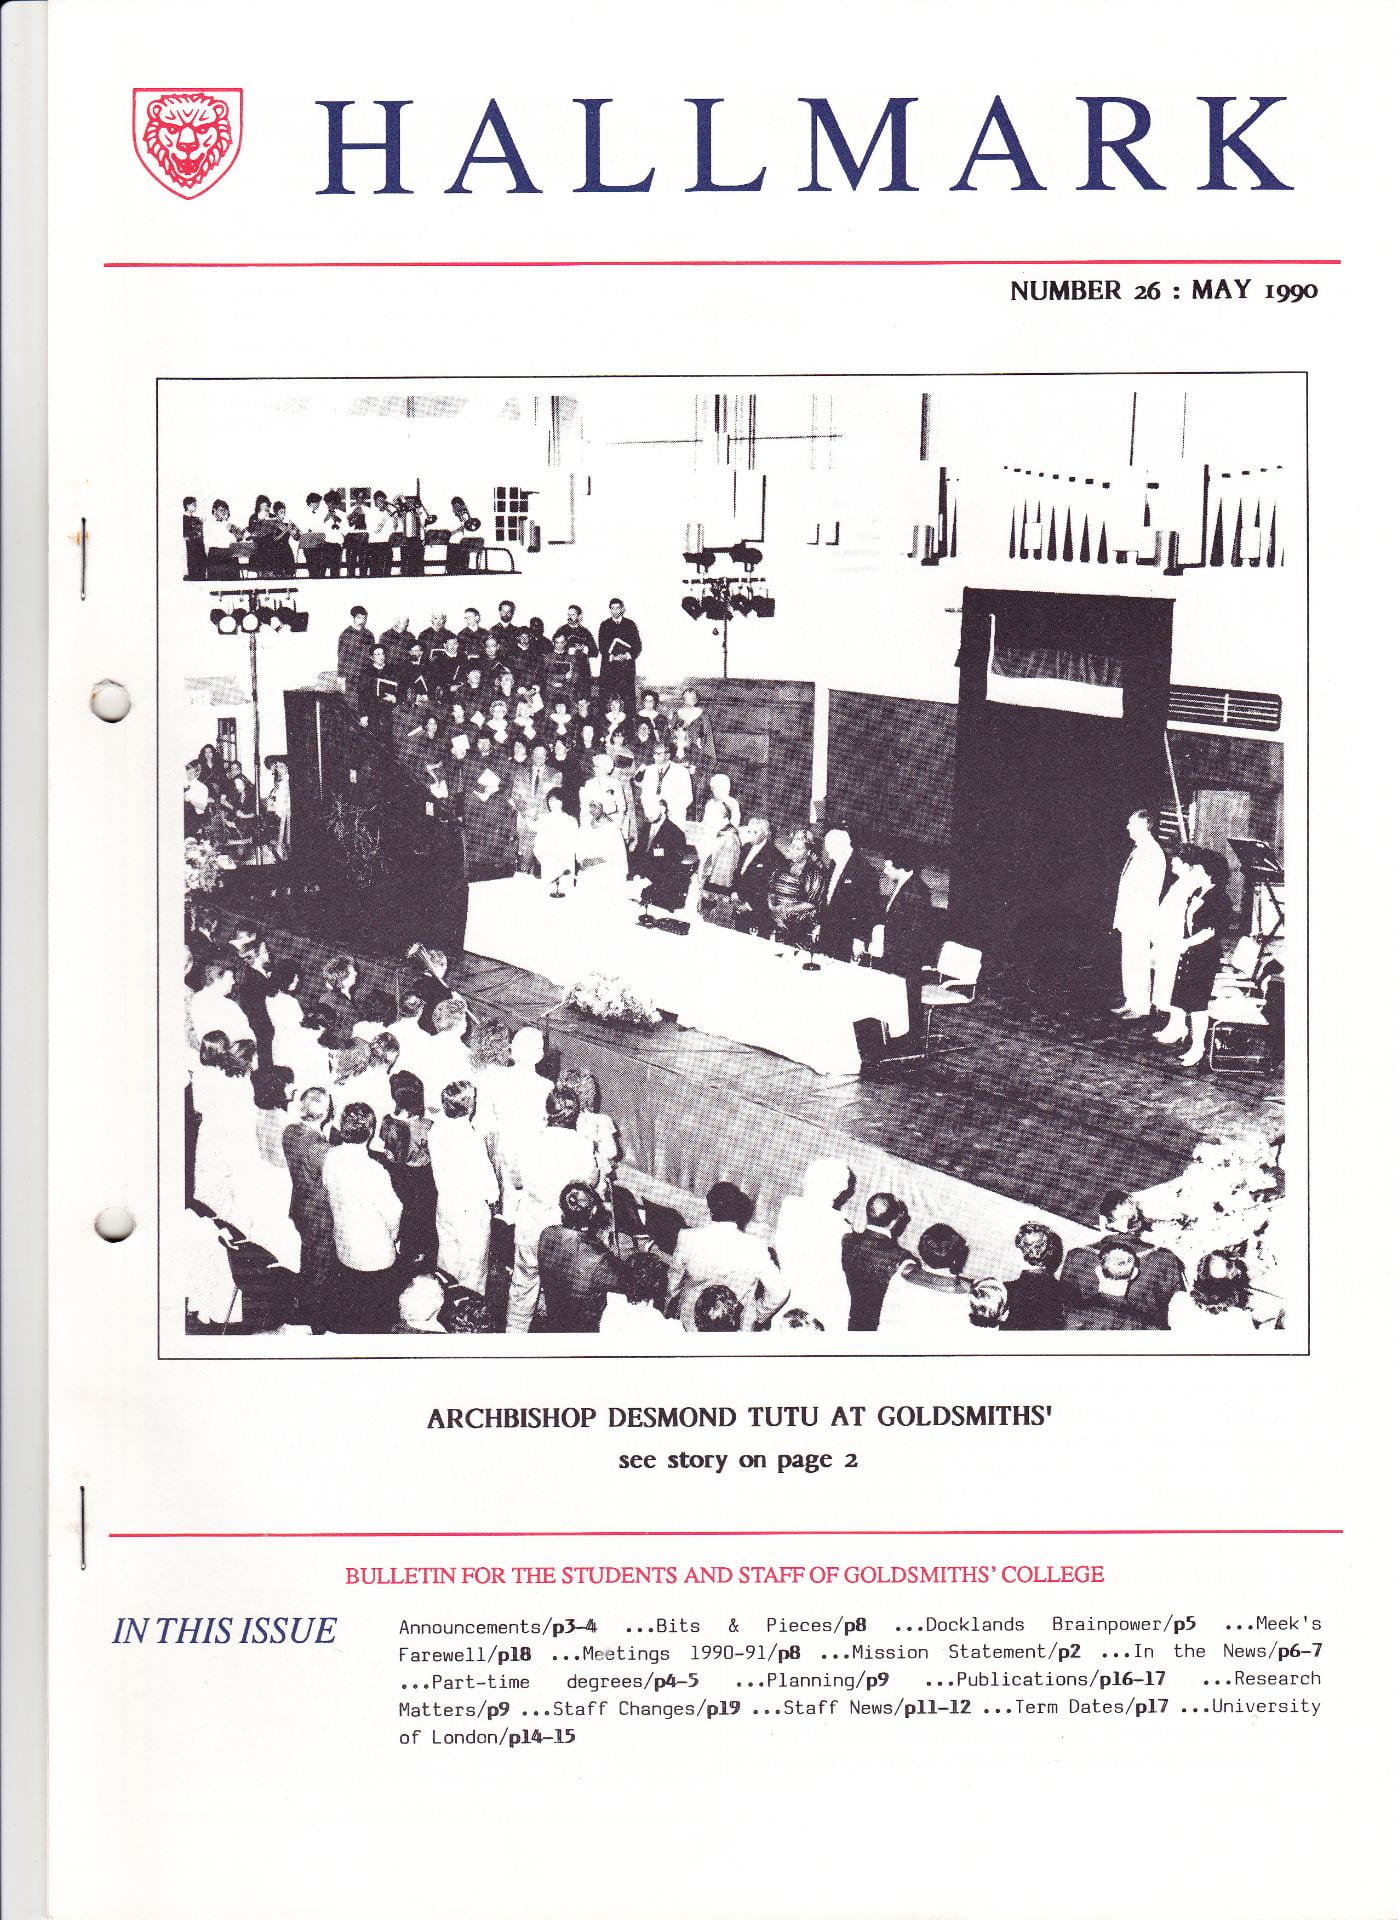 The cover of Goldsmiths' College internal staff and students monthly magazine for May 1990 featuring a scanned image of Archbishop Desmond Tutu receiving the Honorary Freedom of Lewisham in the Great Hall of Goldsmiths' College. 